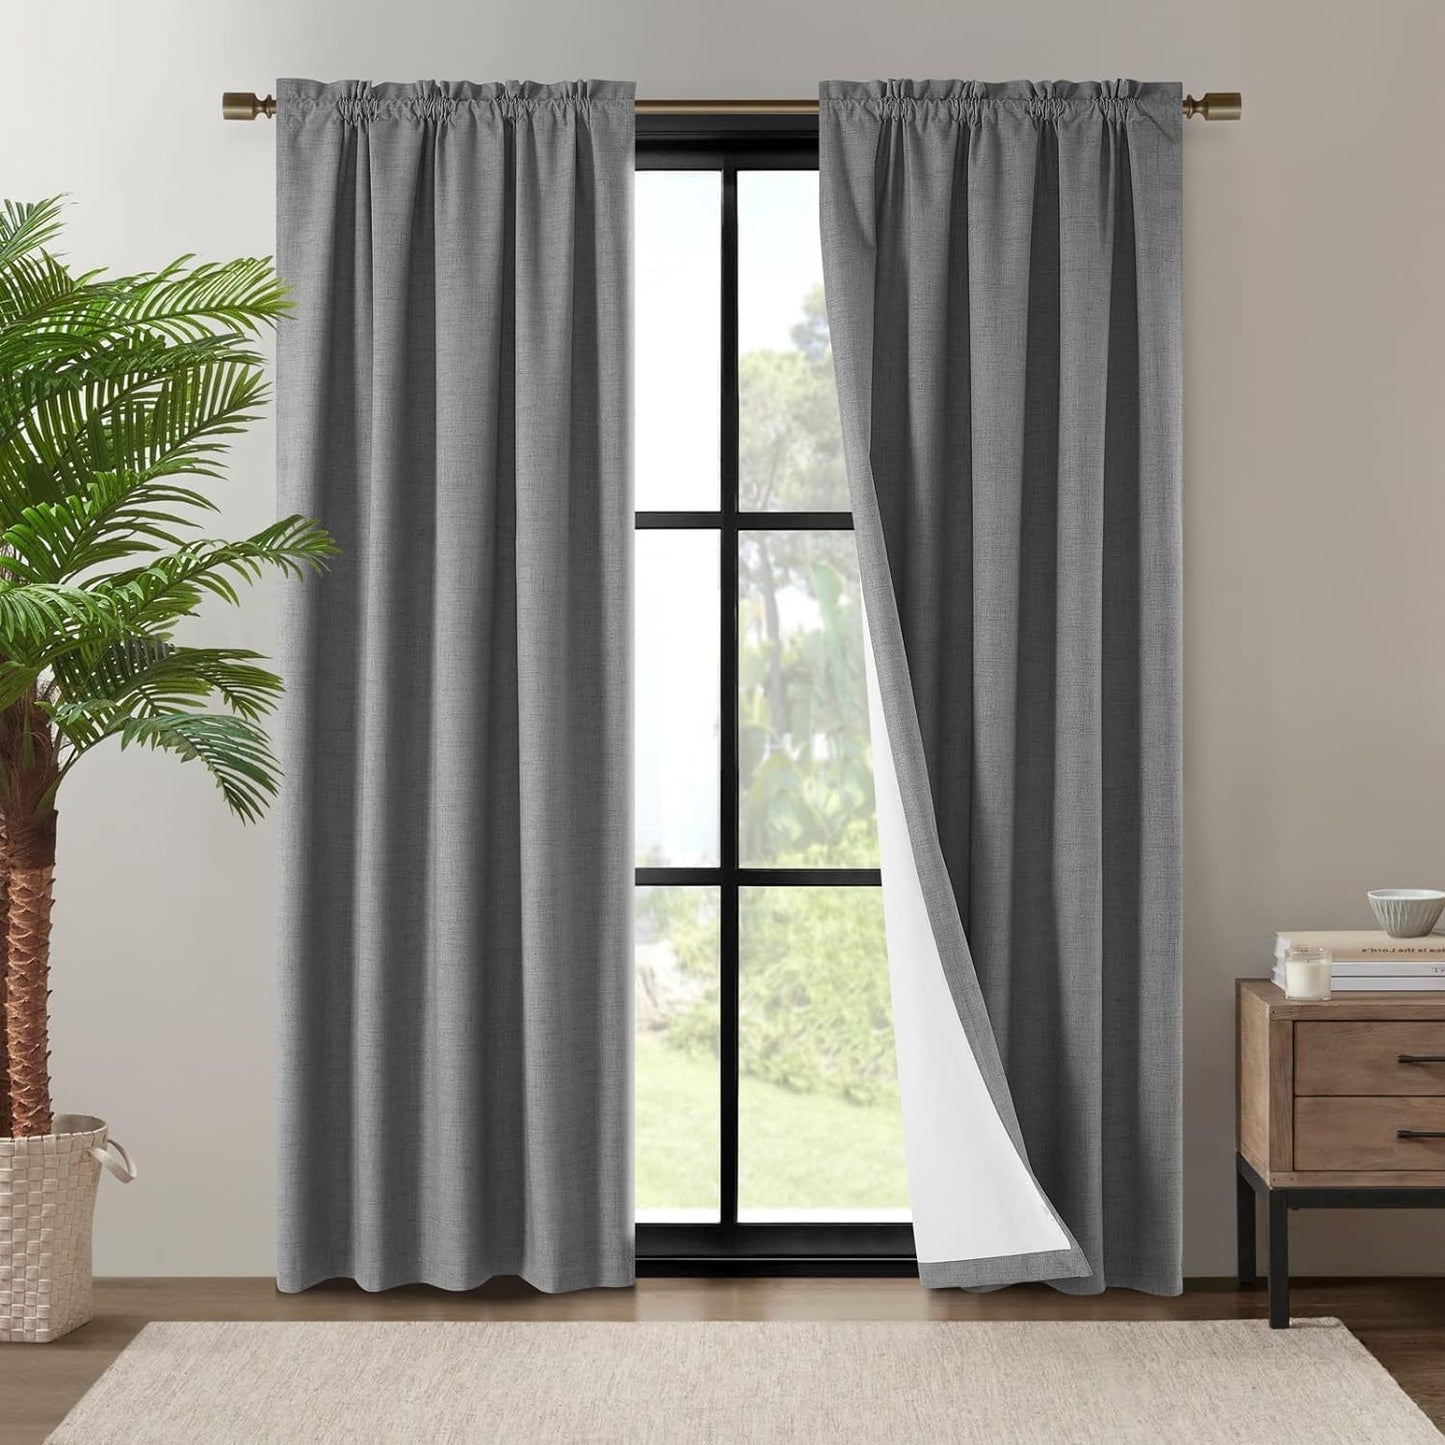 Dreaming Casa Linen Blackout Curtains for Beadroom 2 Panels 102 Inch Long Living Room Drapes Boho Rustic 100% Black Out White Window Curtain with Rod Pocket, 52" W X 102" L  Dreaming Casa Grey, Rod Pocket 2 X (100"W X 102"L) 